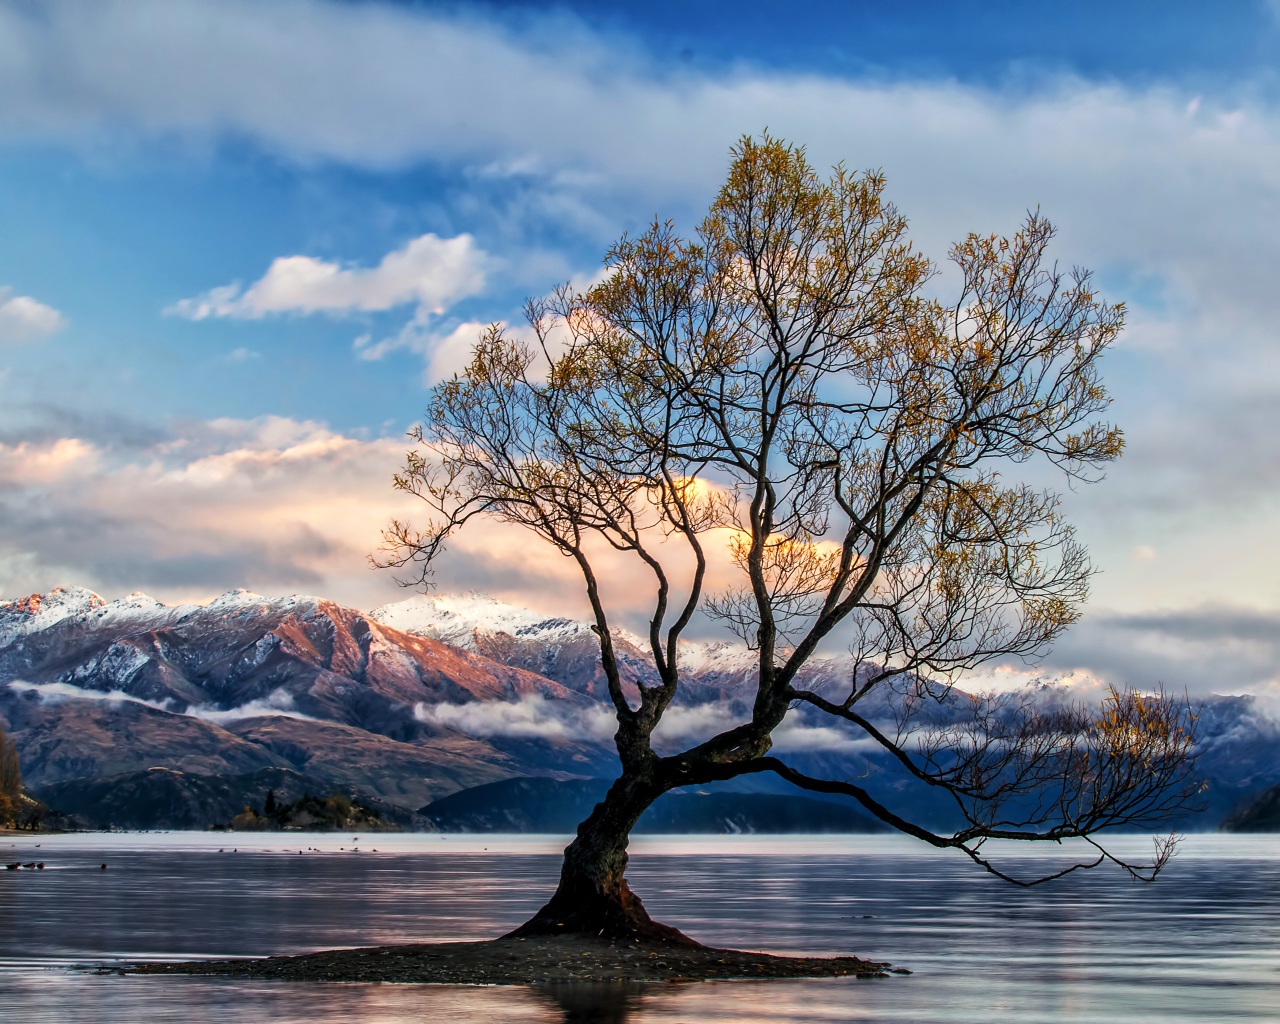 Island with a tree in the middle of the lake against the backdrop of the mountains